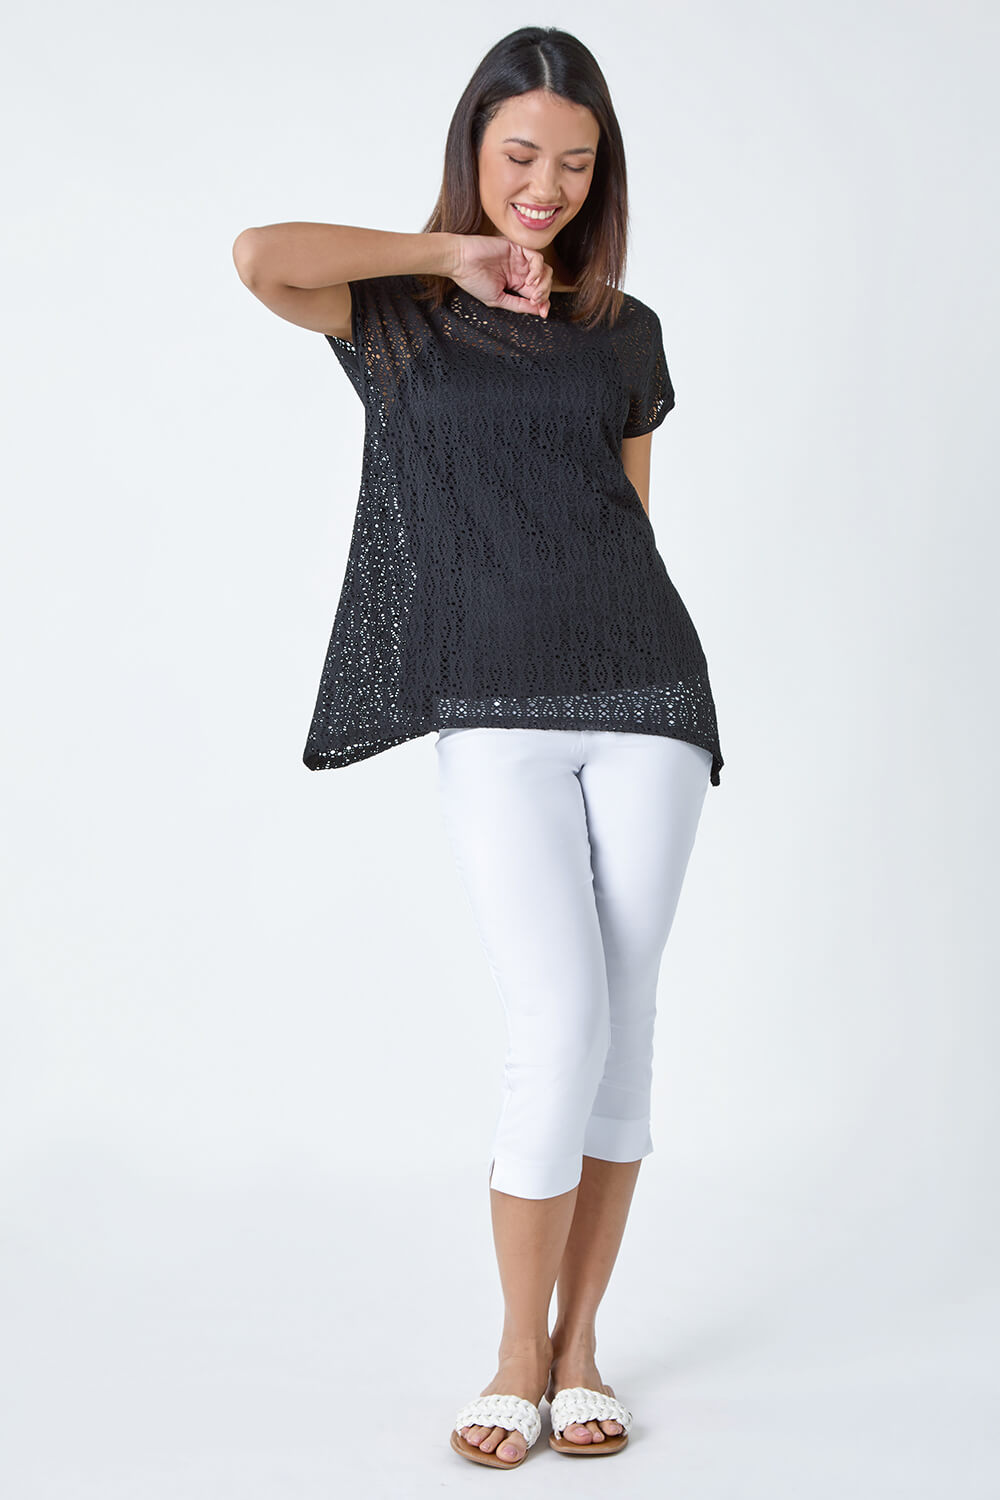 Black Crochet Overlay Stretch Top, Image 2 of 5